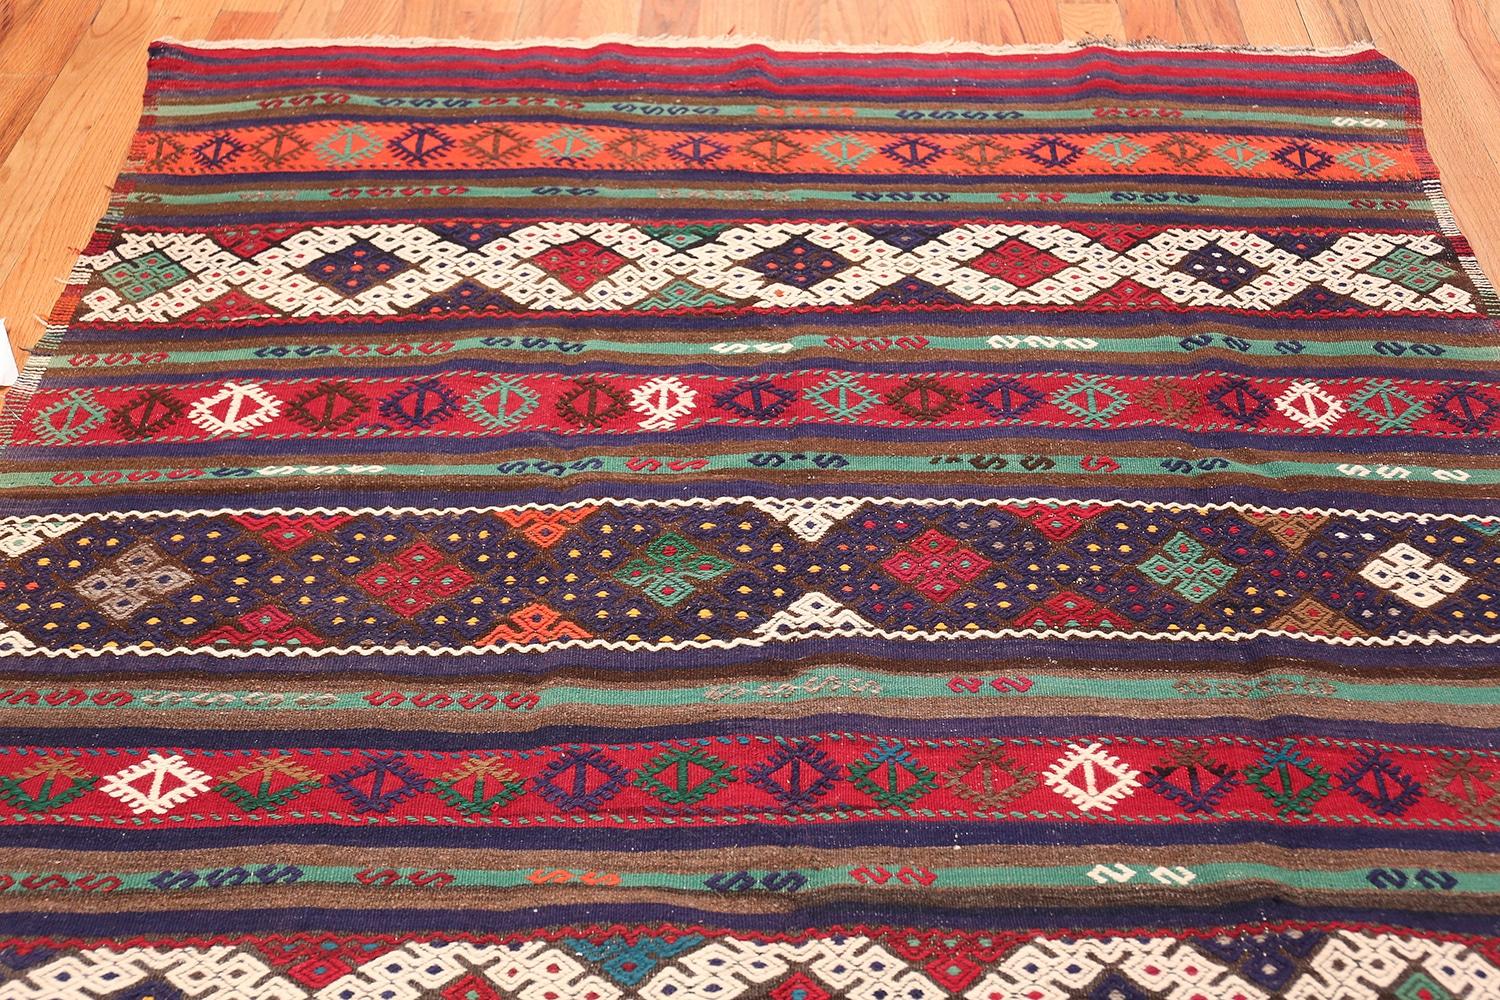 Wool Vintage Tribal Turkish Kilim. Size: 5 ft 3 in x 9 ft 2 in